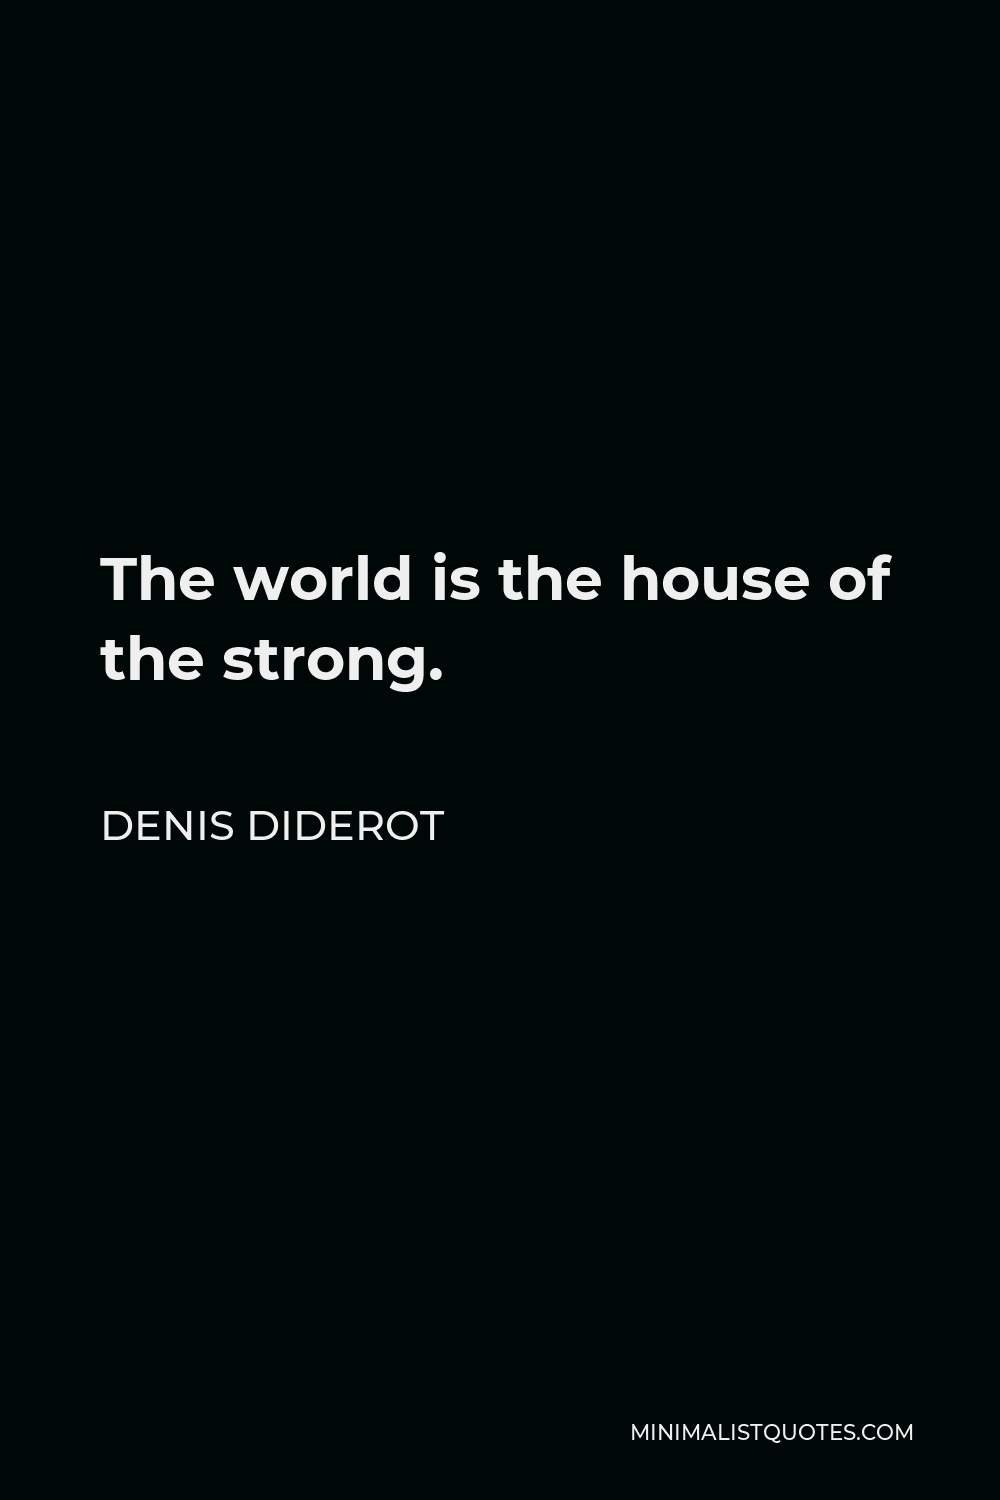 Denis Diderot Quote - The world is the house of the strong.